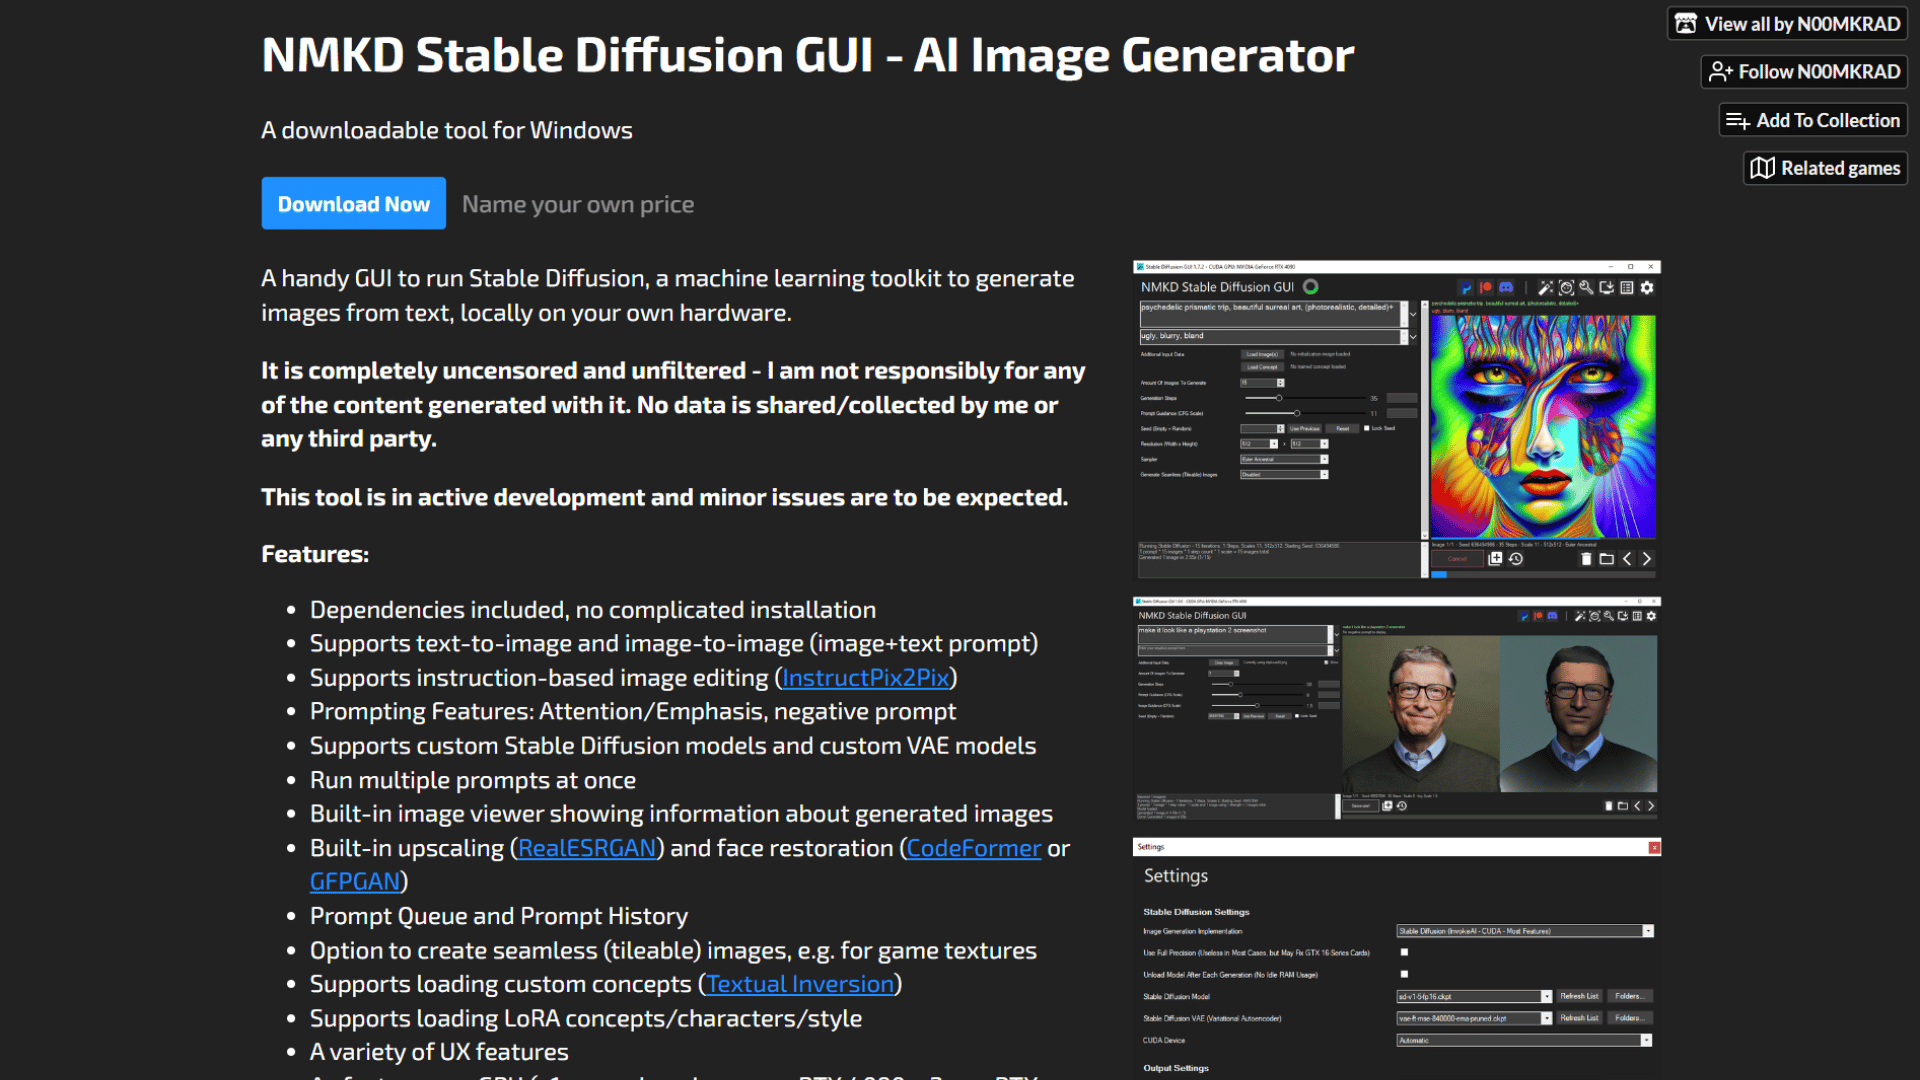 NMKD Stable Diffusion GUI - Image Generators - Images